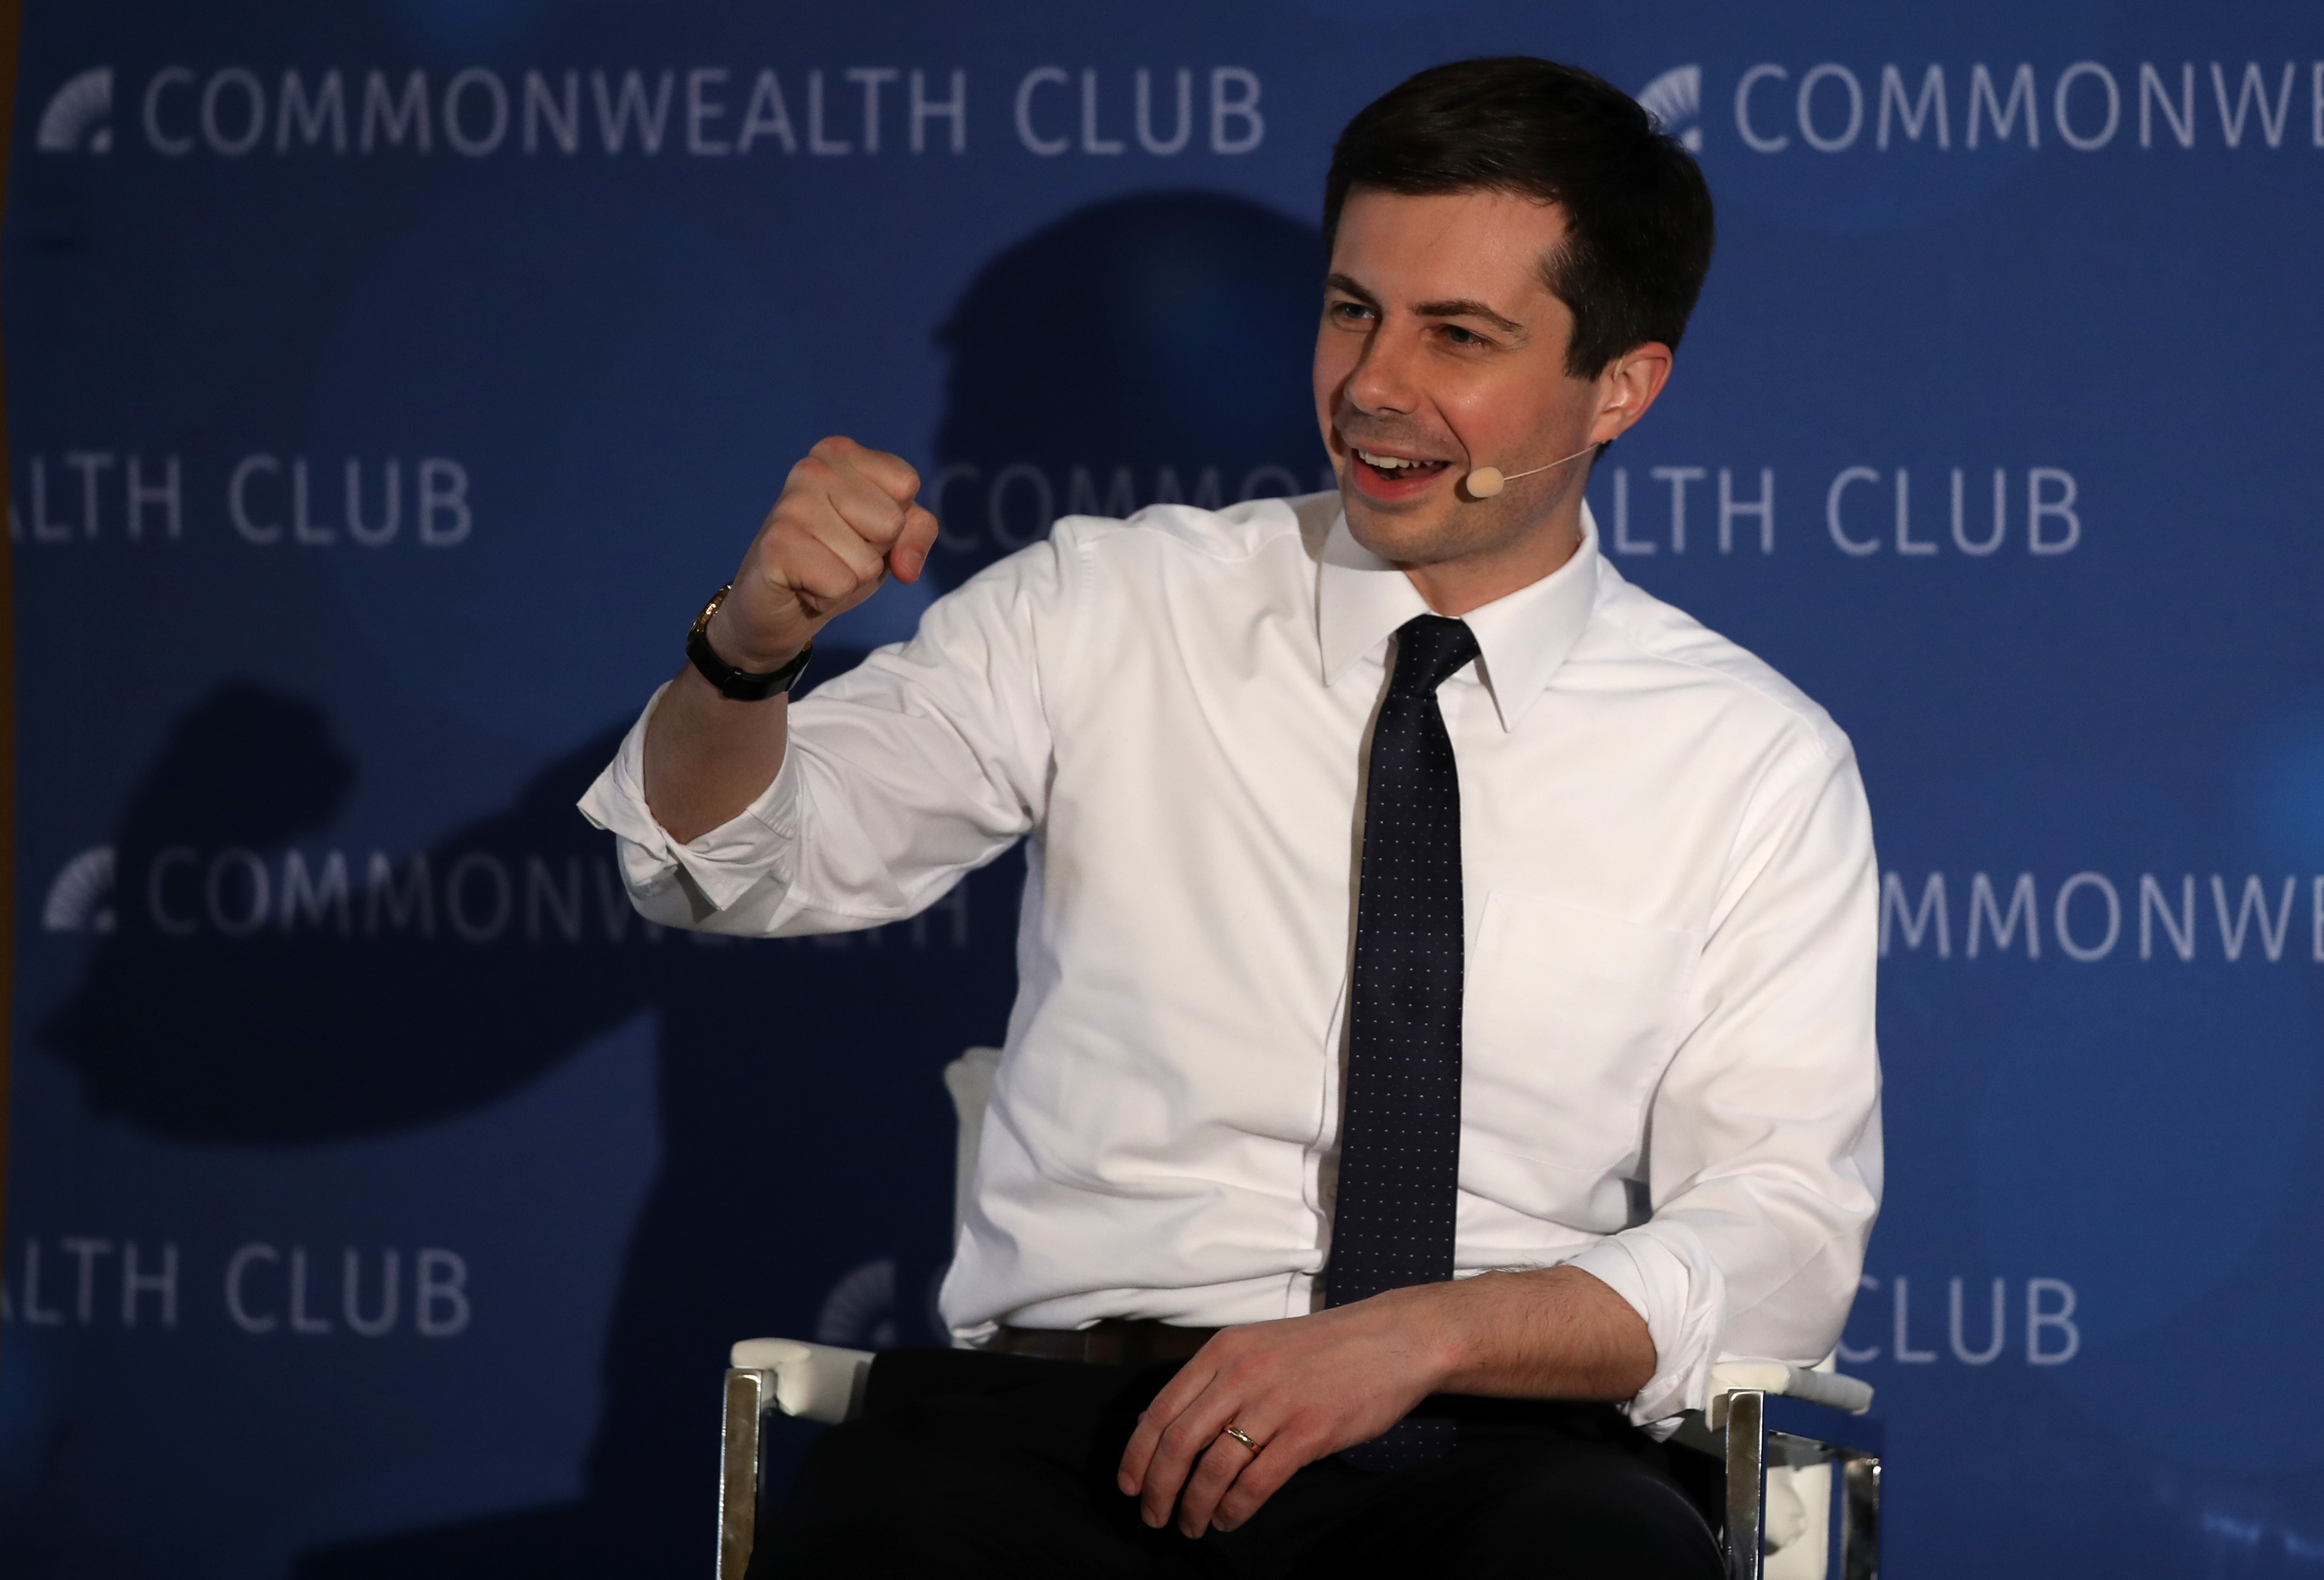 Democratic presidential hopeful South Bend, Indiana mayor Pete Buttigieg speaks at the Commonwealth Club of California on March 28, 2019 in San Francisco, California. (Justin Sullivan—Getty Images)